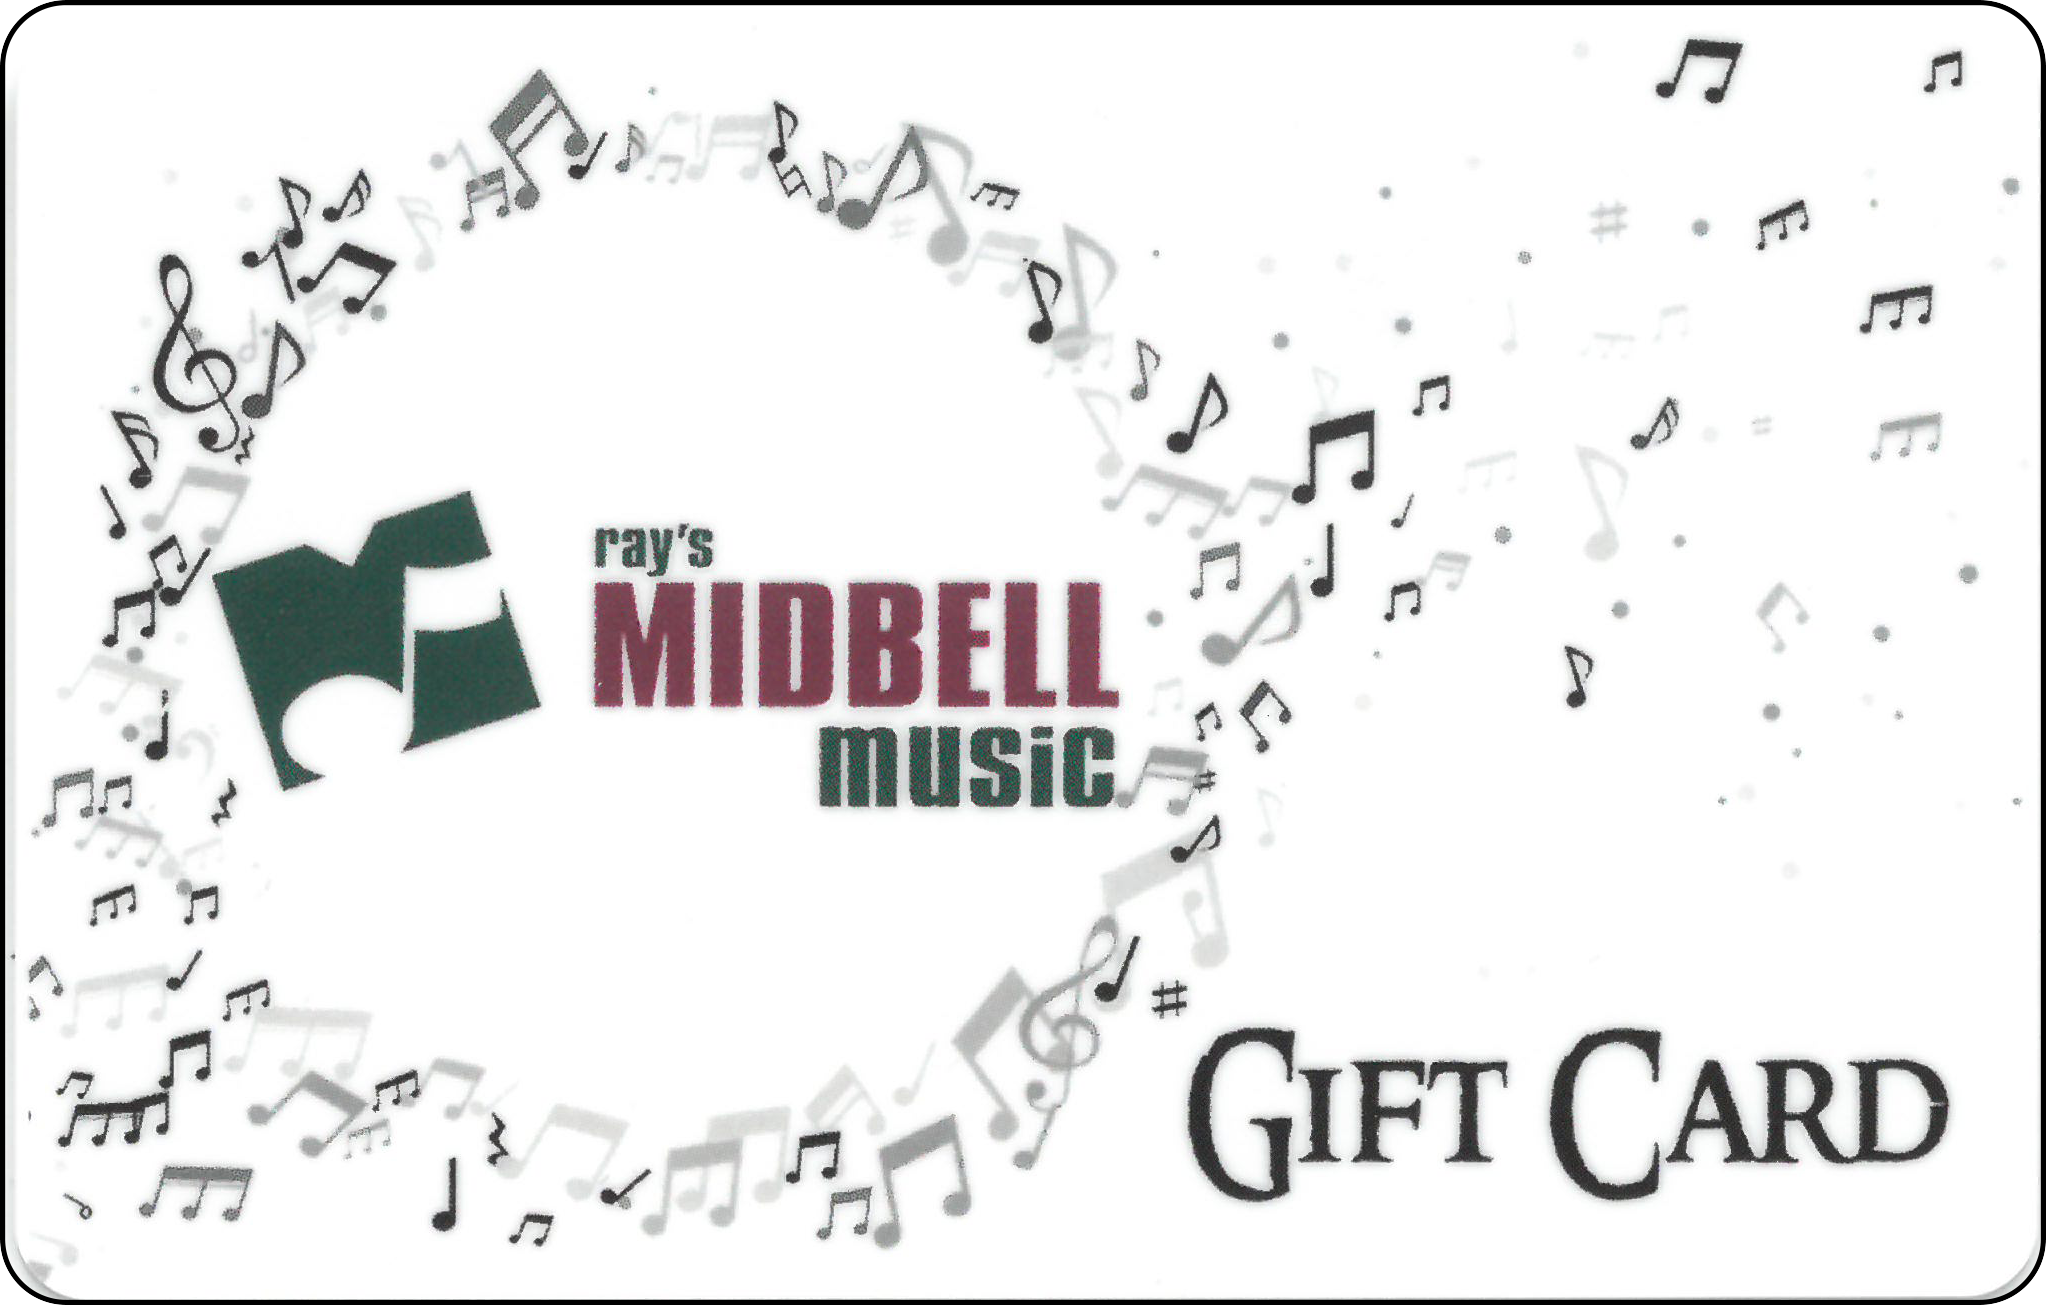 Midbell Music $300.00 Gift Card